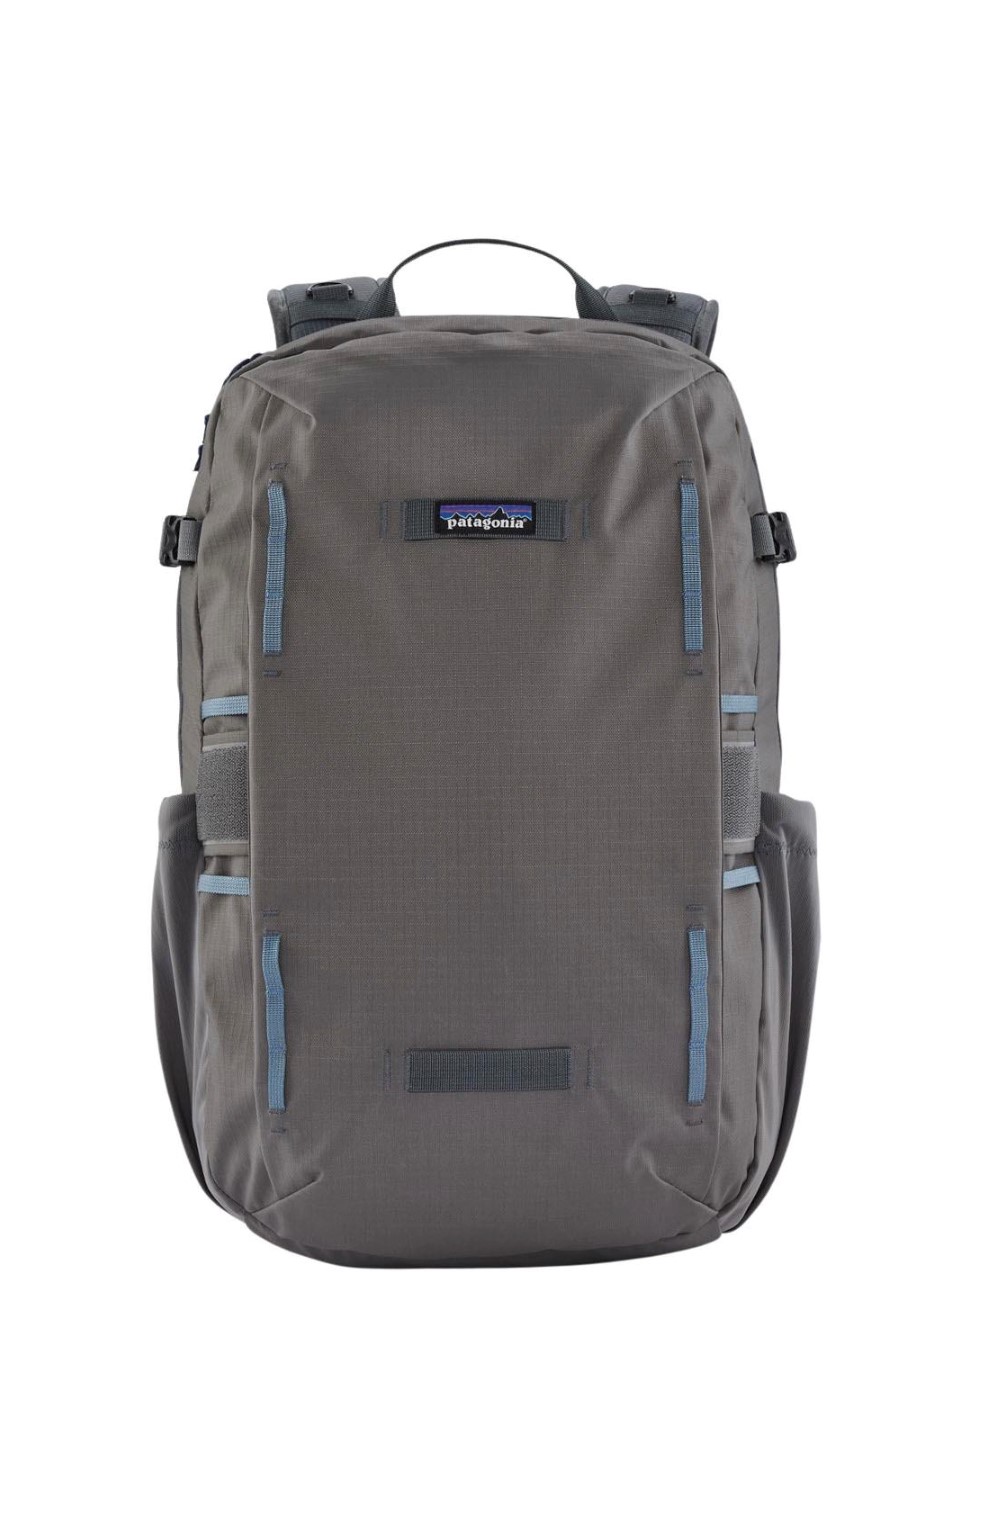 Stealth Pack 30L